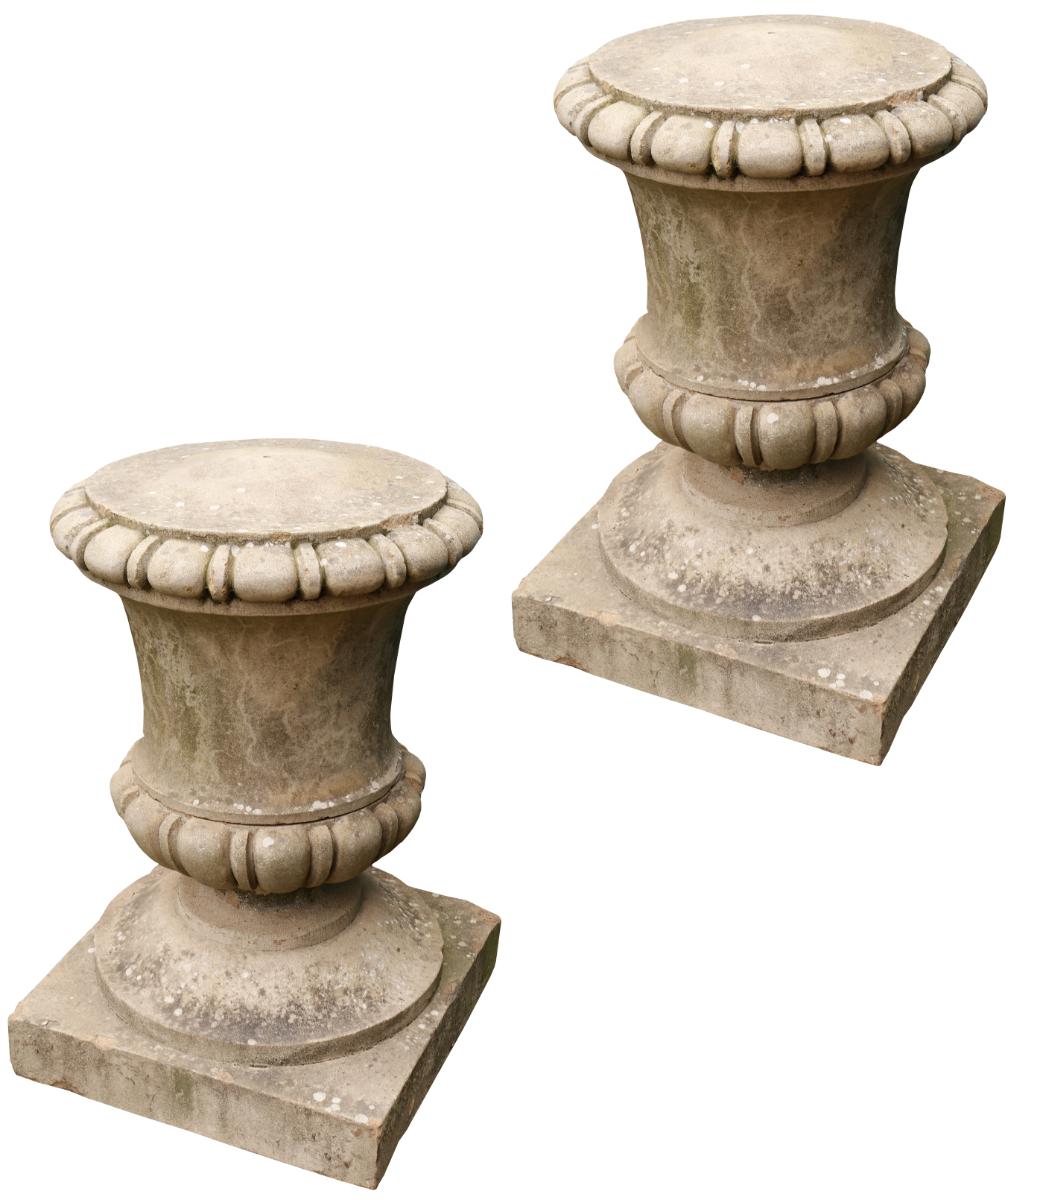 A pair of large scale lidded composition stone urn finials. Suitable for use as gate piers or as garden ornaments.